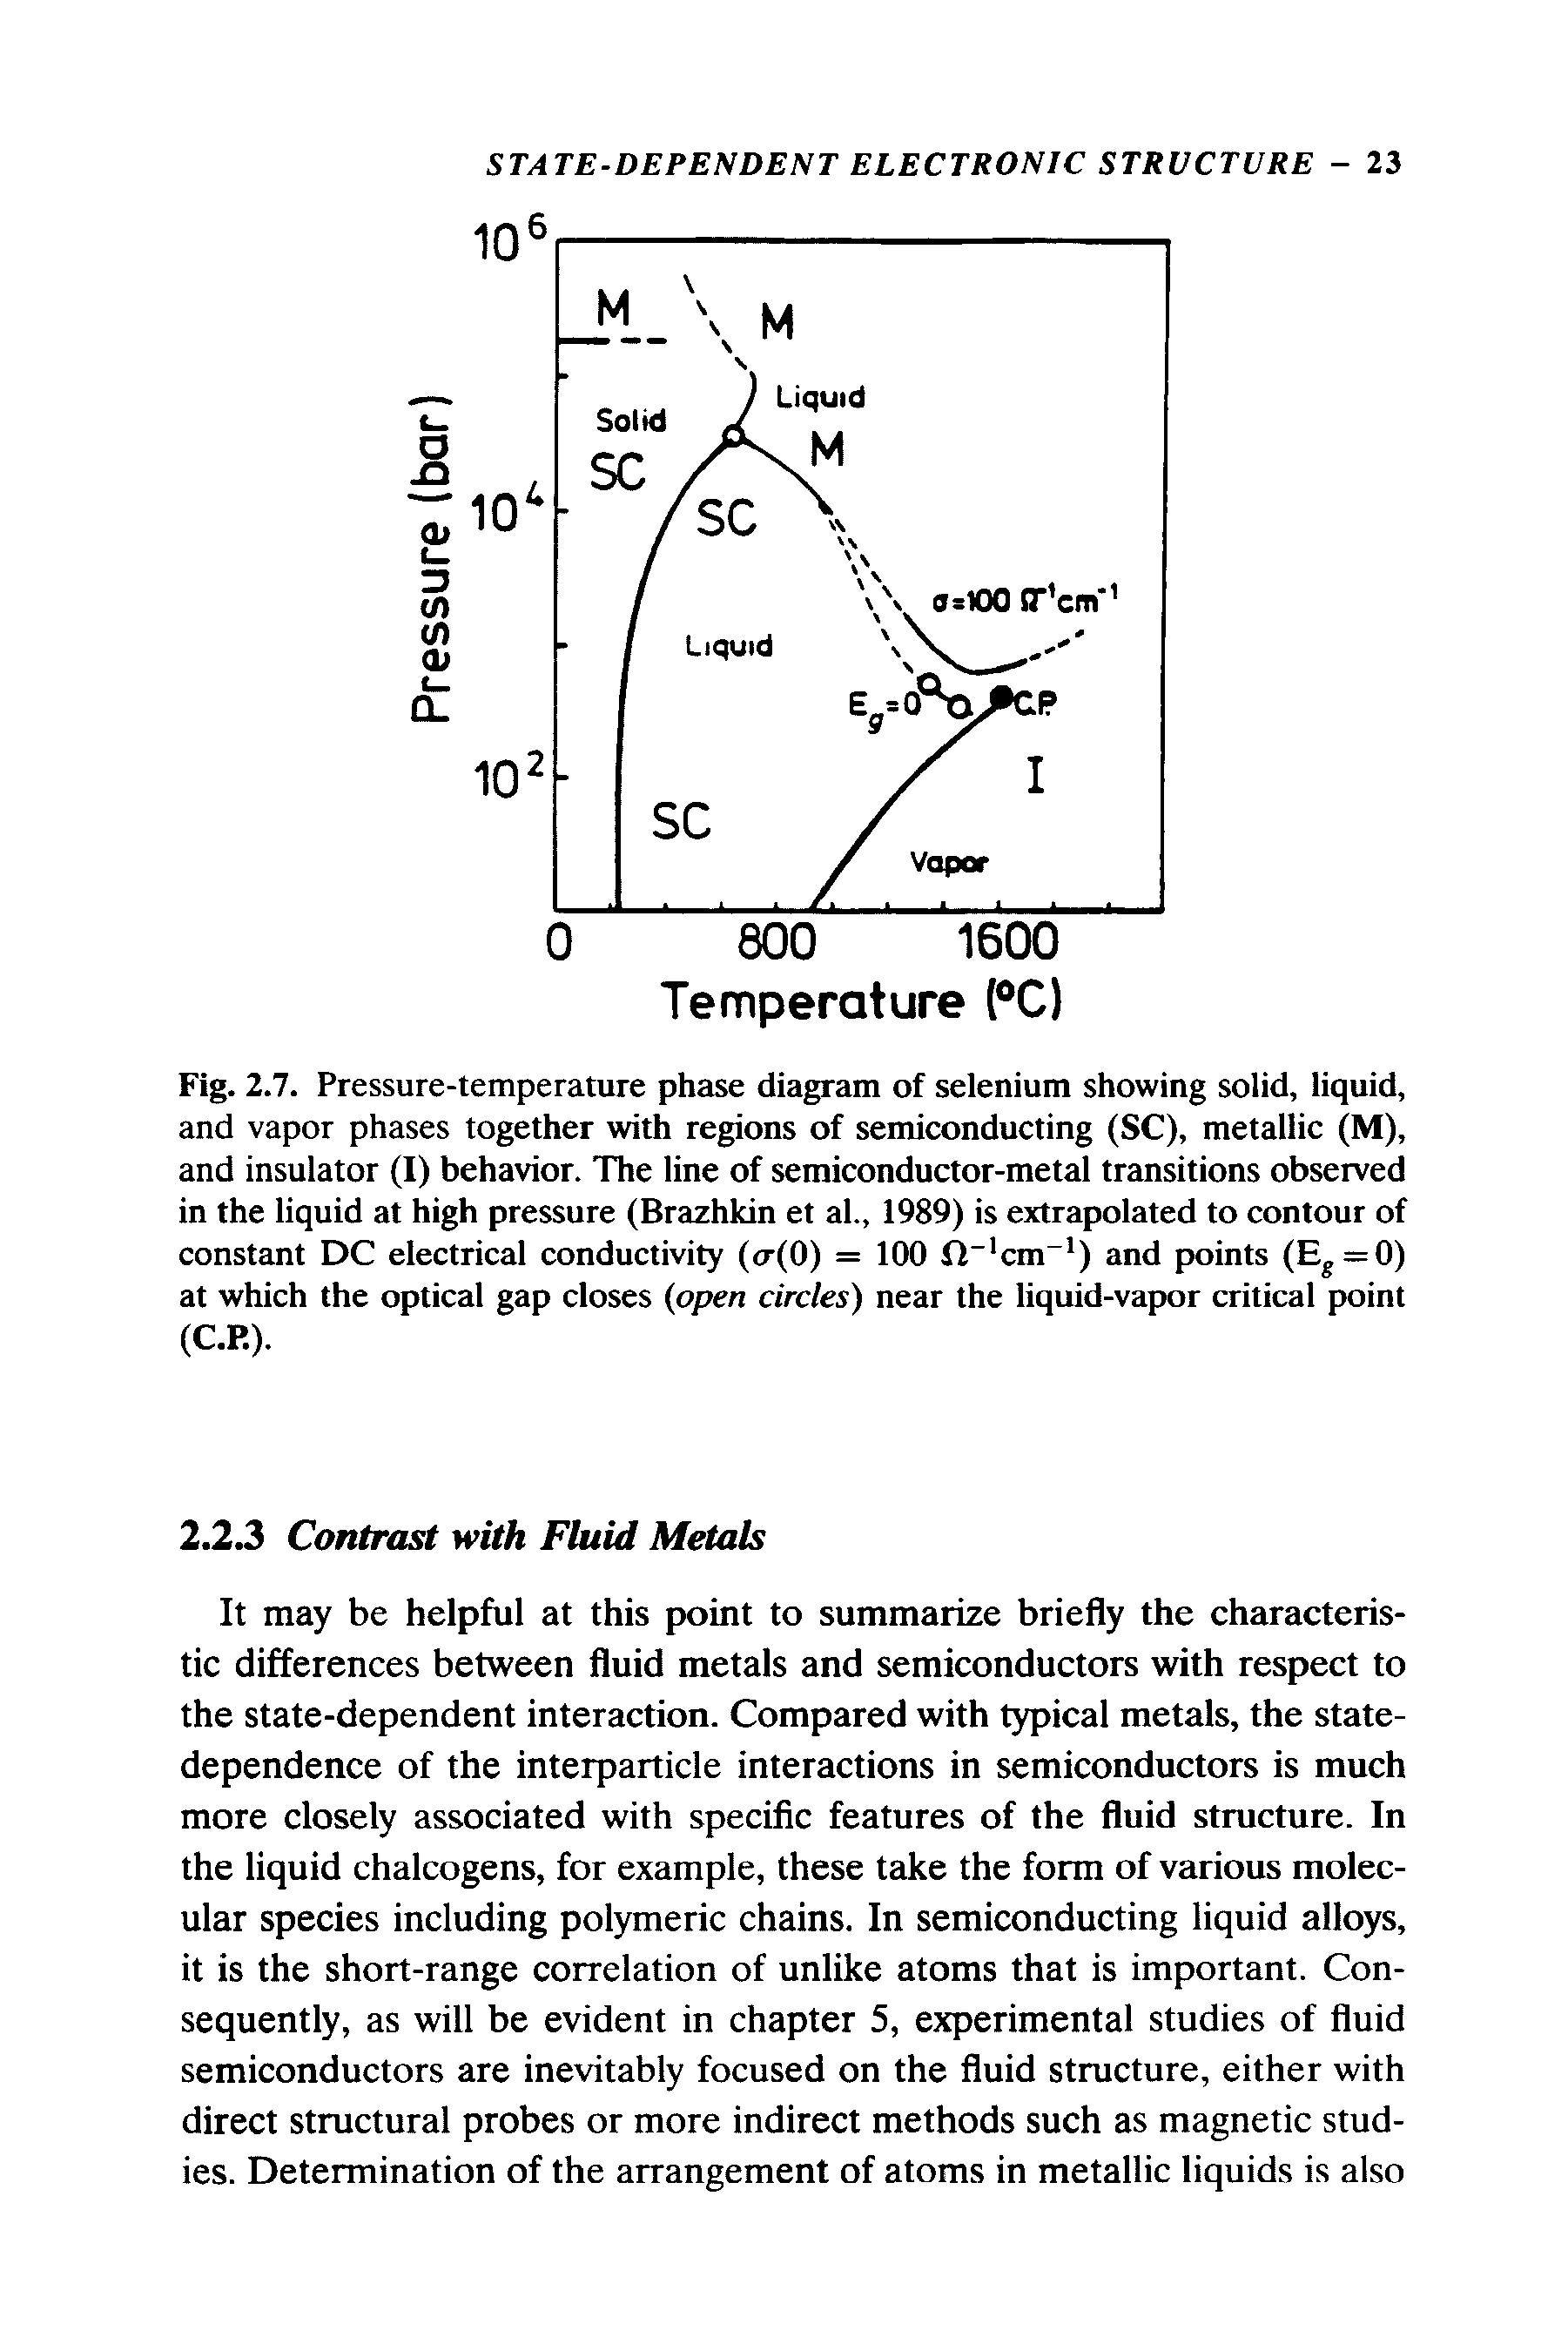 Fig. 2.7. Pressure-temperature phase diagram of selenium showing solid, liquid, and vapor phases together with regions of semiconducting (SC), metallic (M), and insulator (I) behavior. The line of semiconductor-metal transitions observed in the liquid at high pressure (Brazhkin et al., 1989) is extrapolated to contour of constant DC electrical conductivity (<r(0) = 100 ft cm ) and points (Eg = 0) at which the optical gap closes open circles) near the liquid-vapor critical point (C.P.).